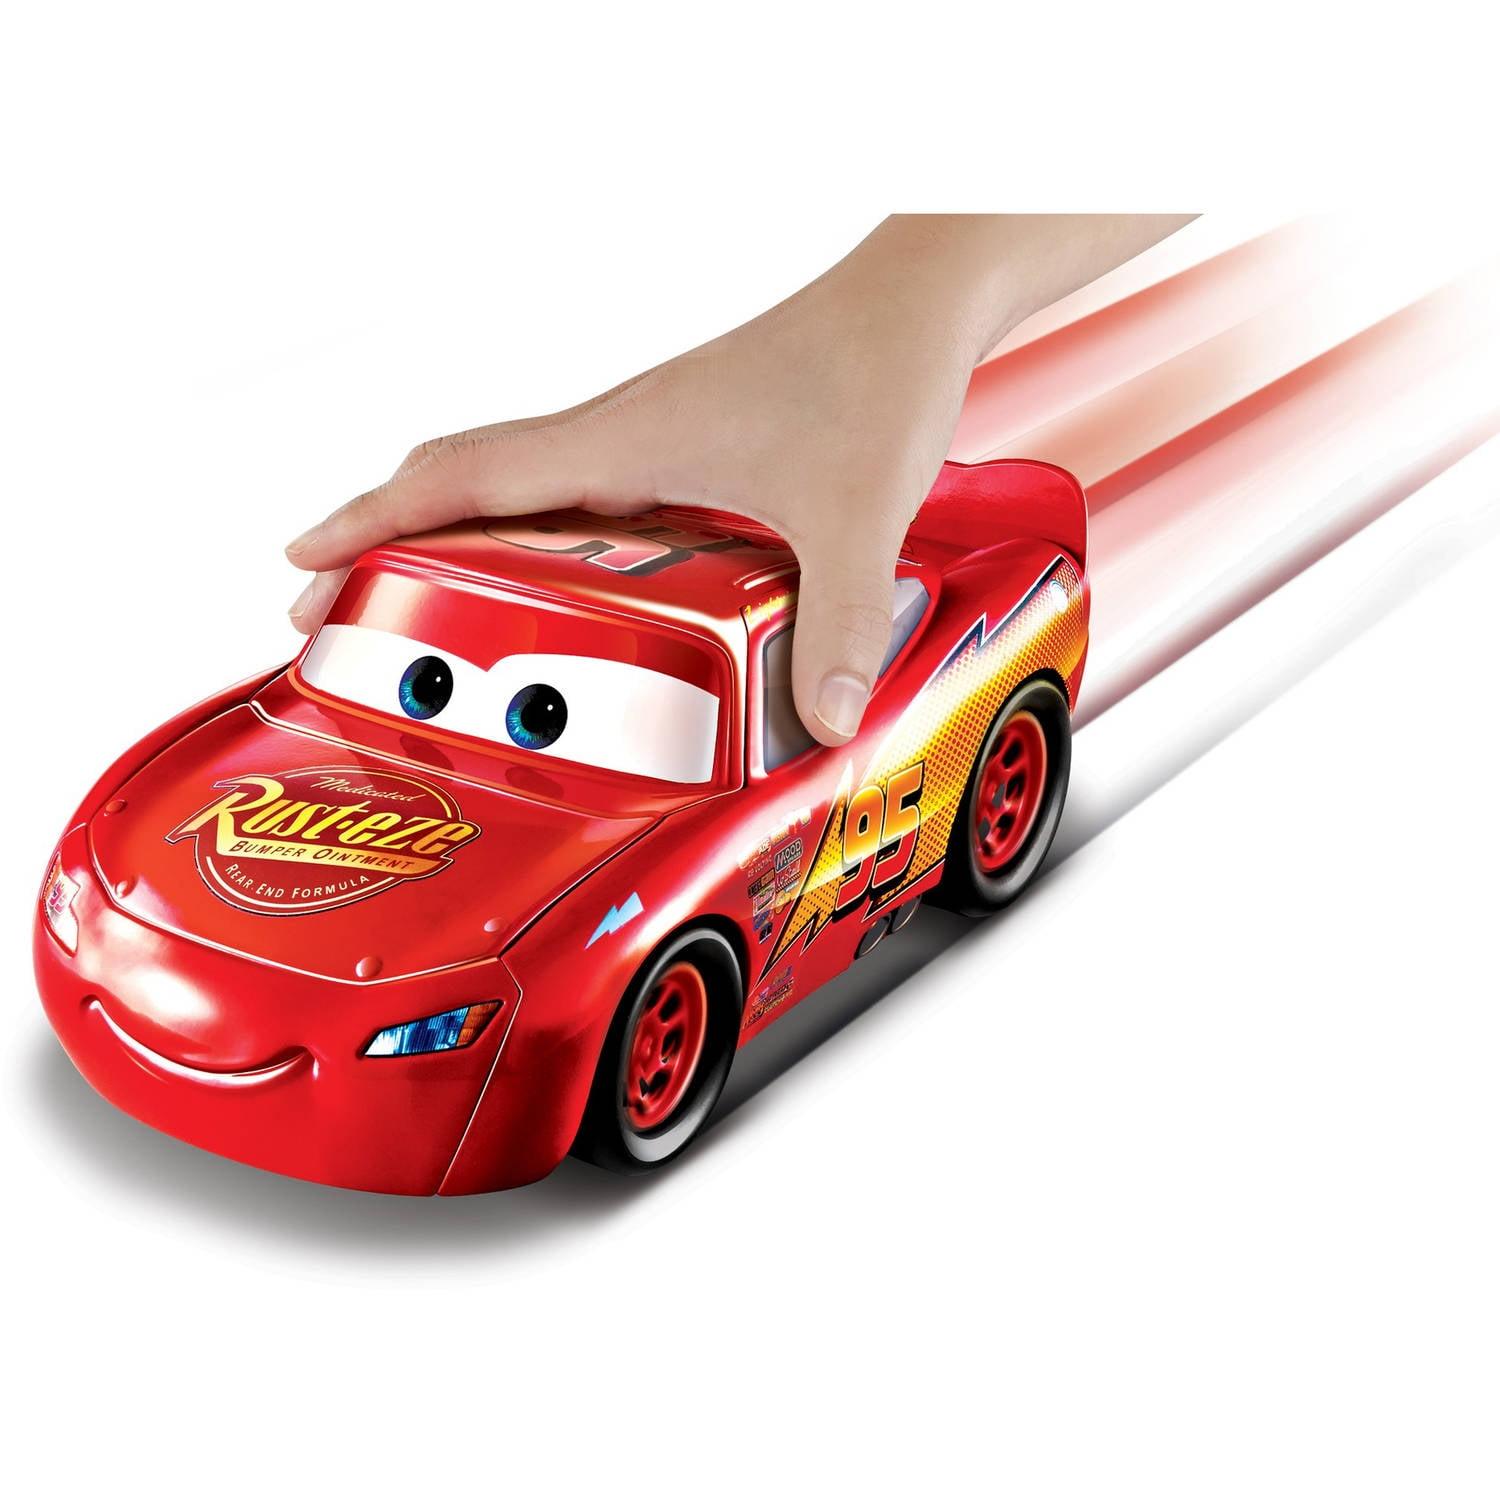 Lightning Mcqueen Rc Car: Stylish Design and Impressive Performance: The Lightning McQueen RC Car